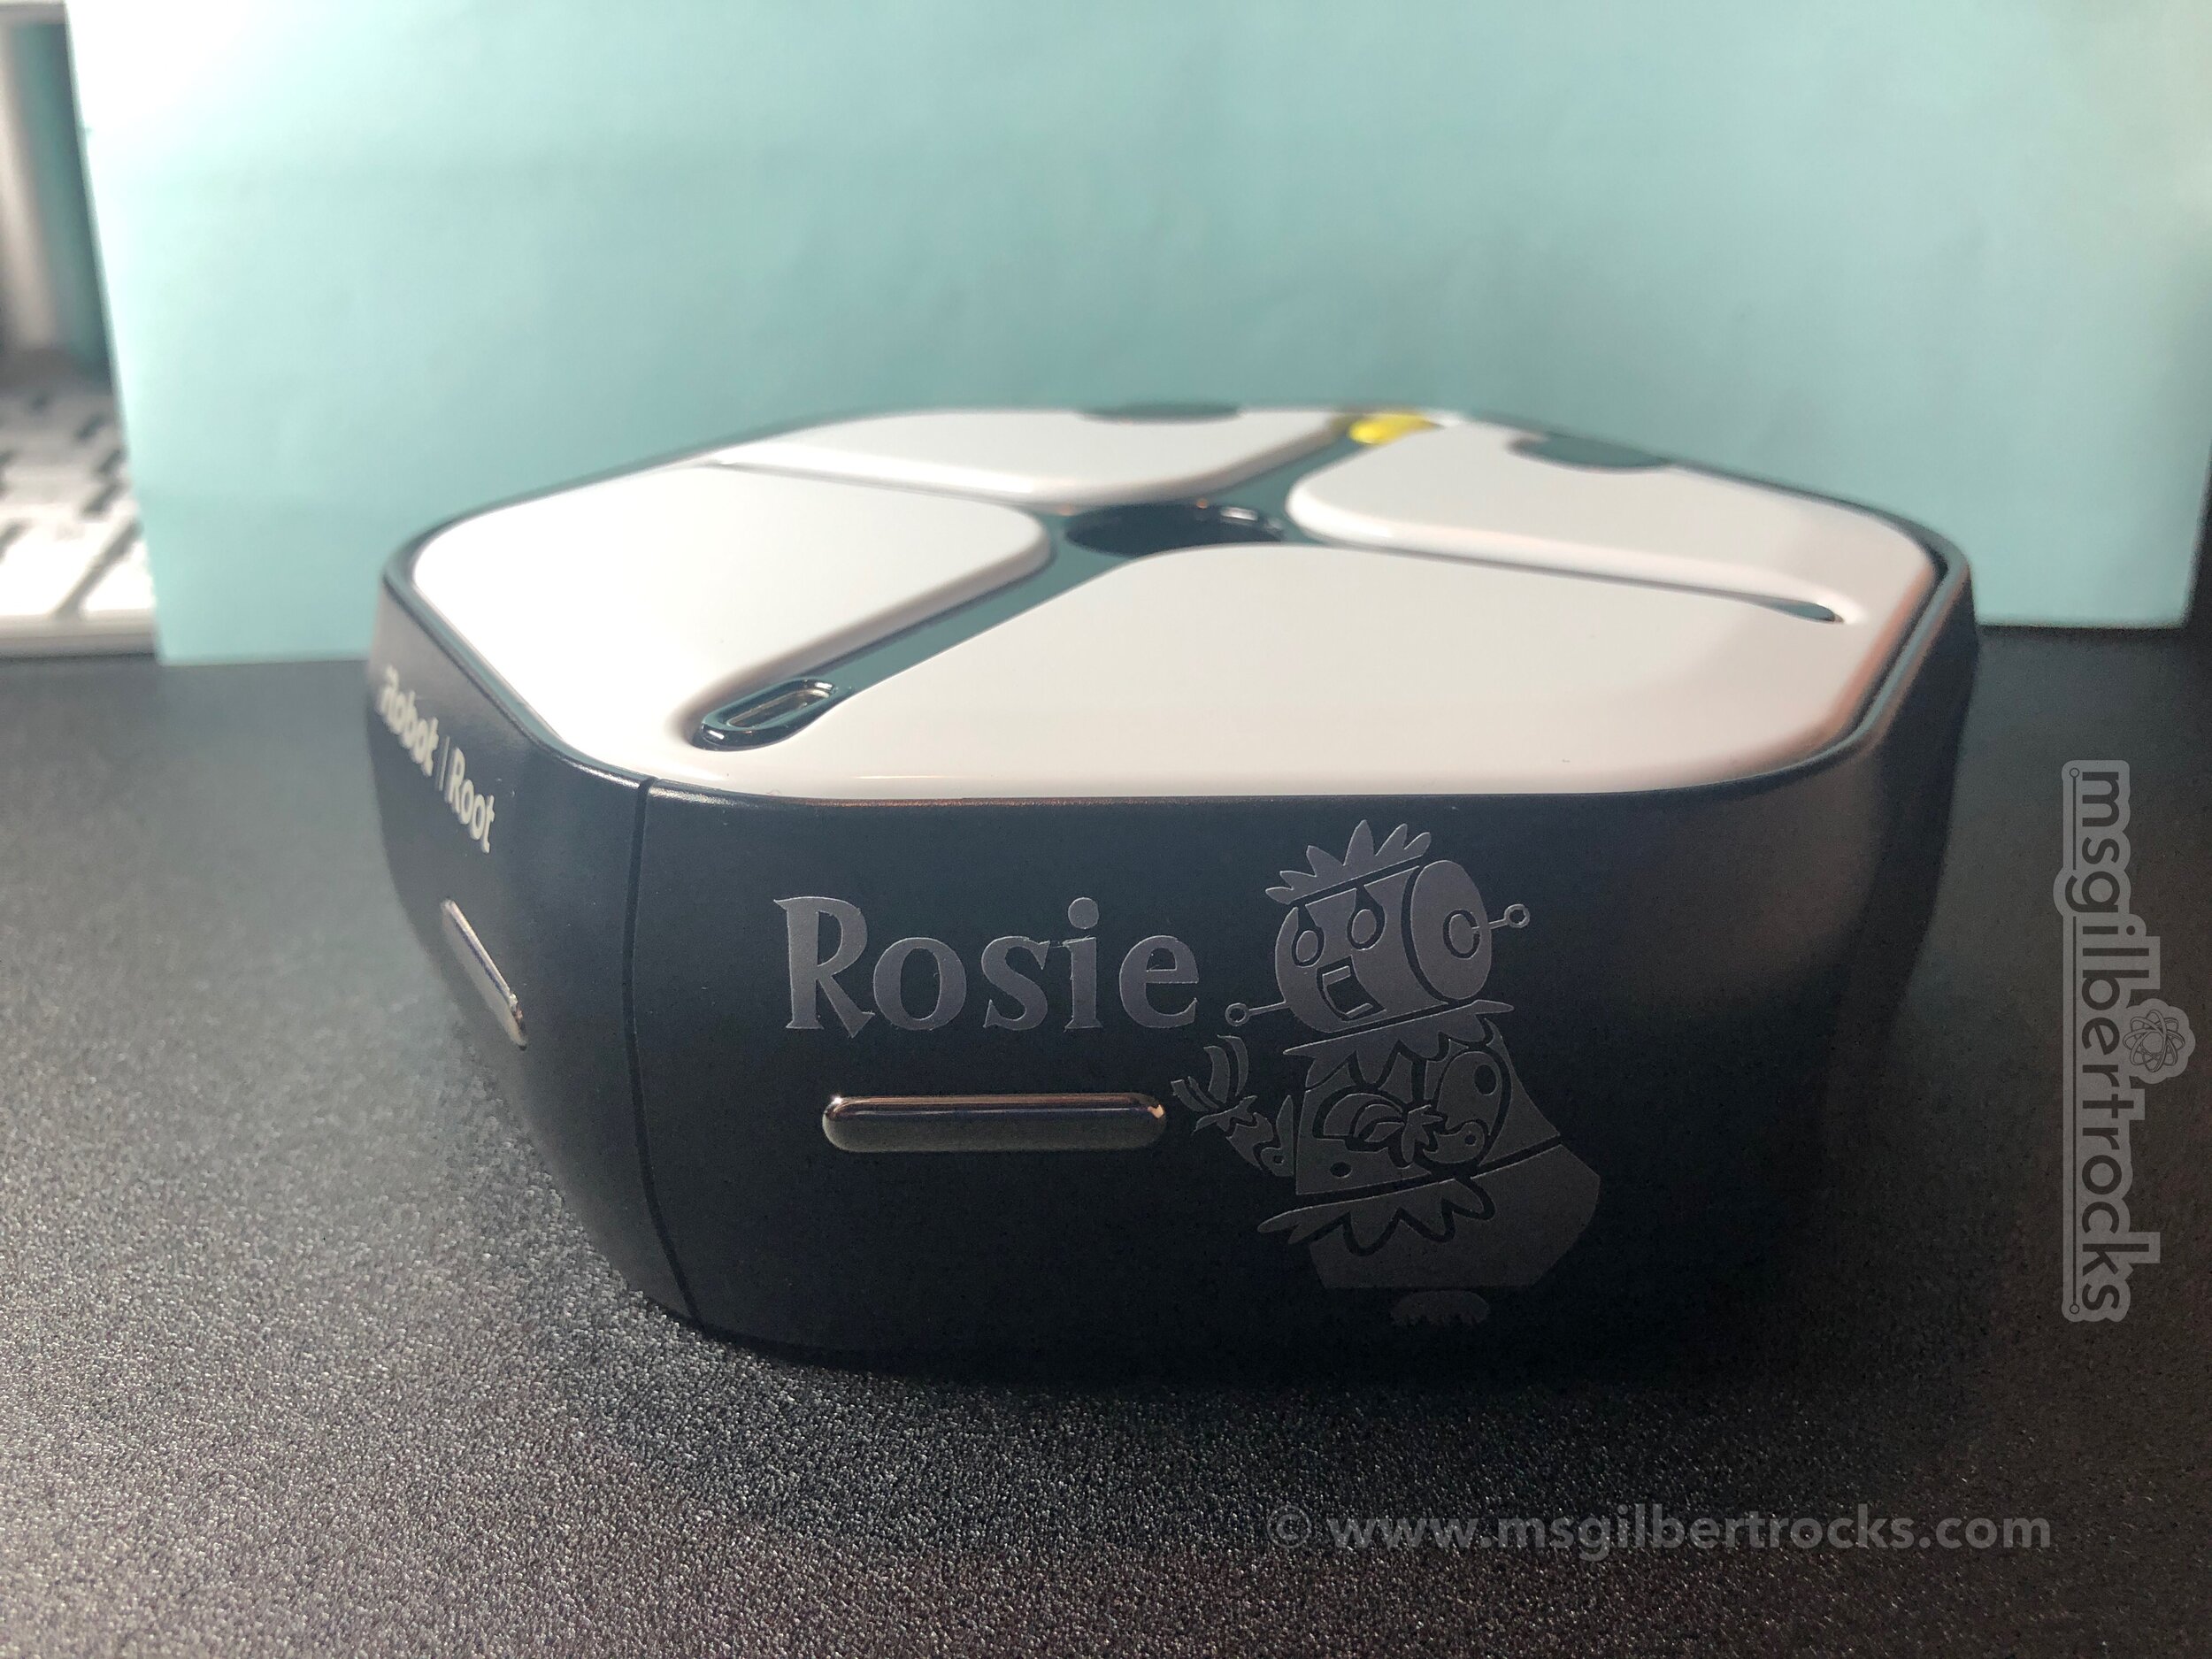 Crafting With A Silhouette Cameo 3 Msgilbertrocks